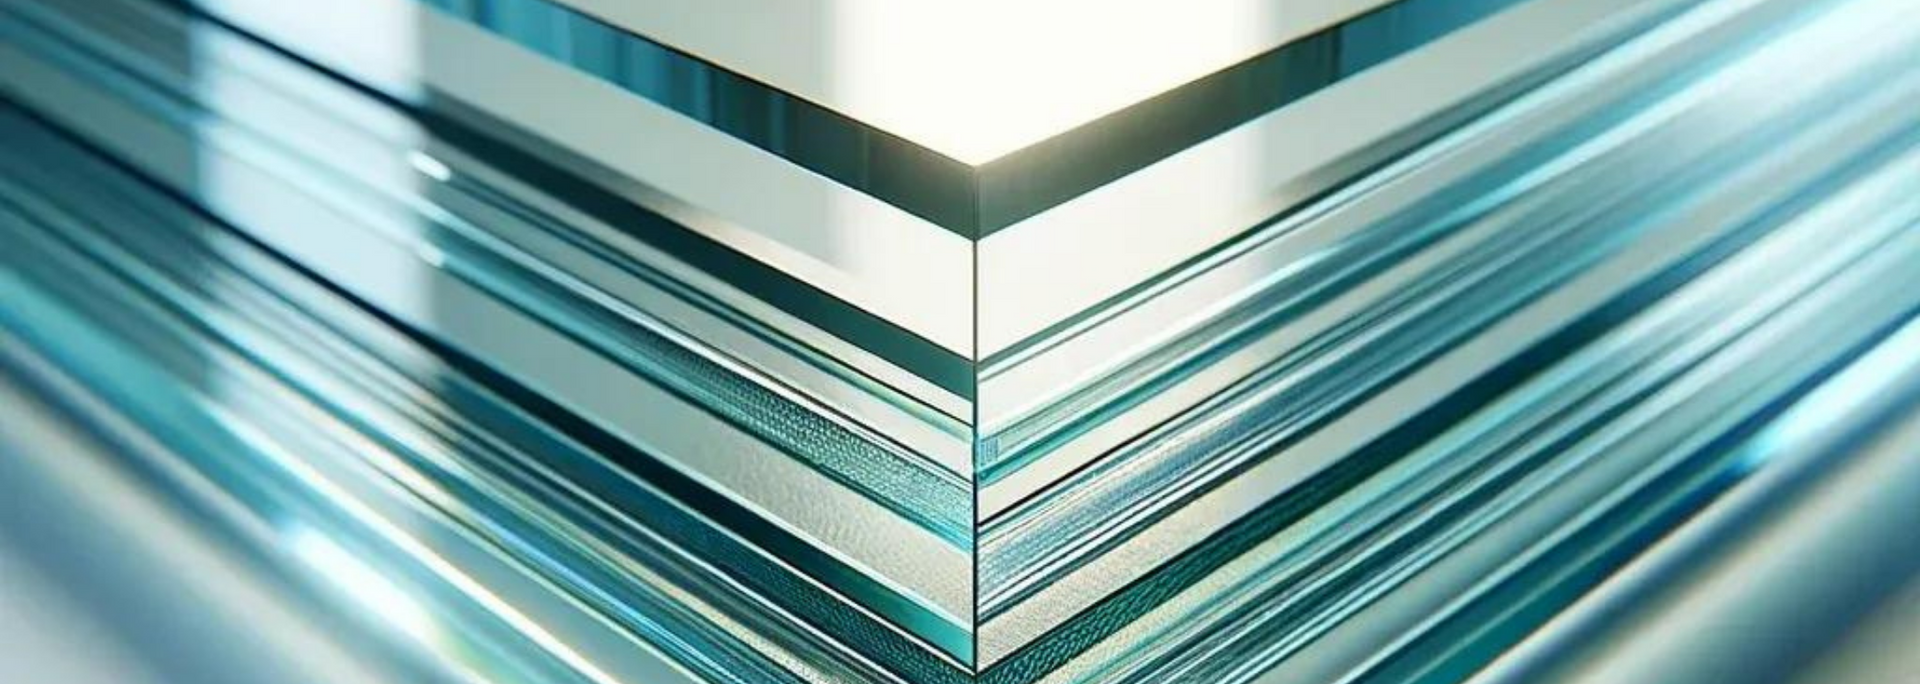 Picture of a section of laminated glass 